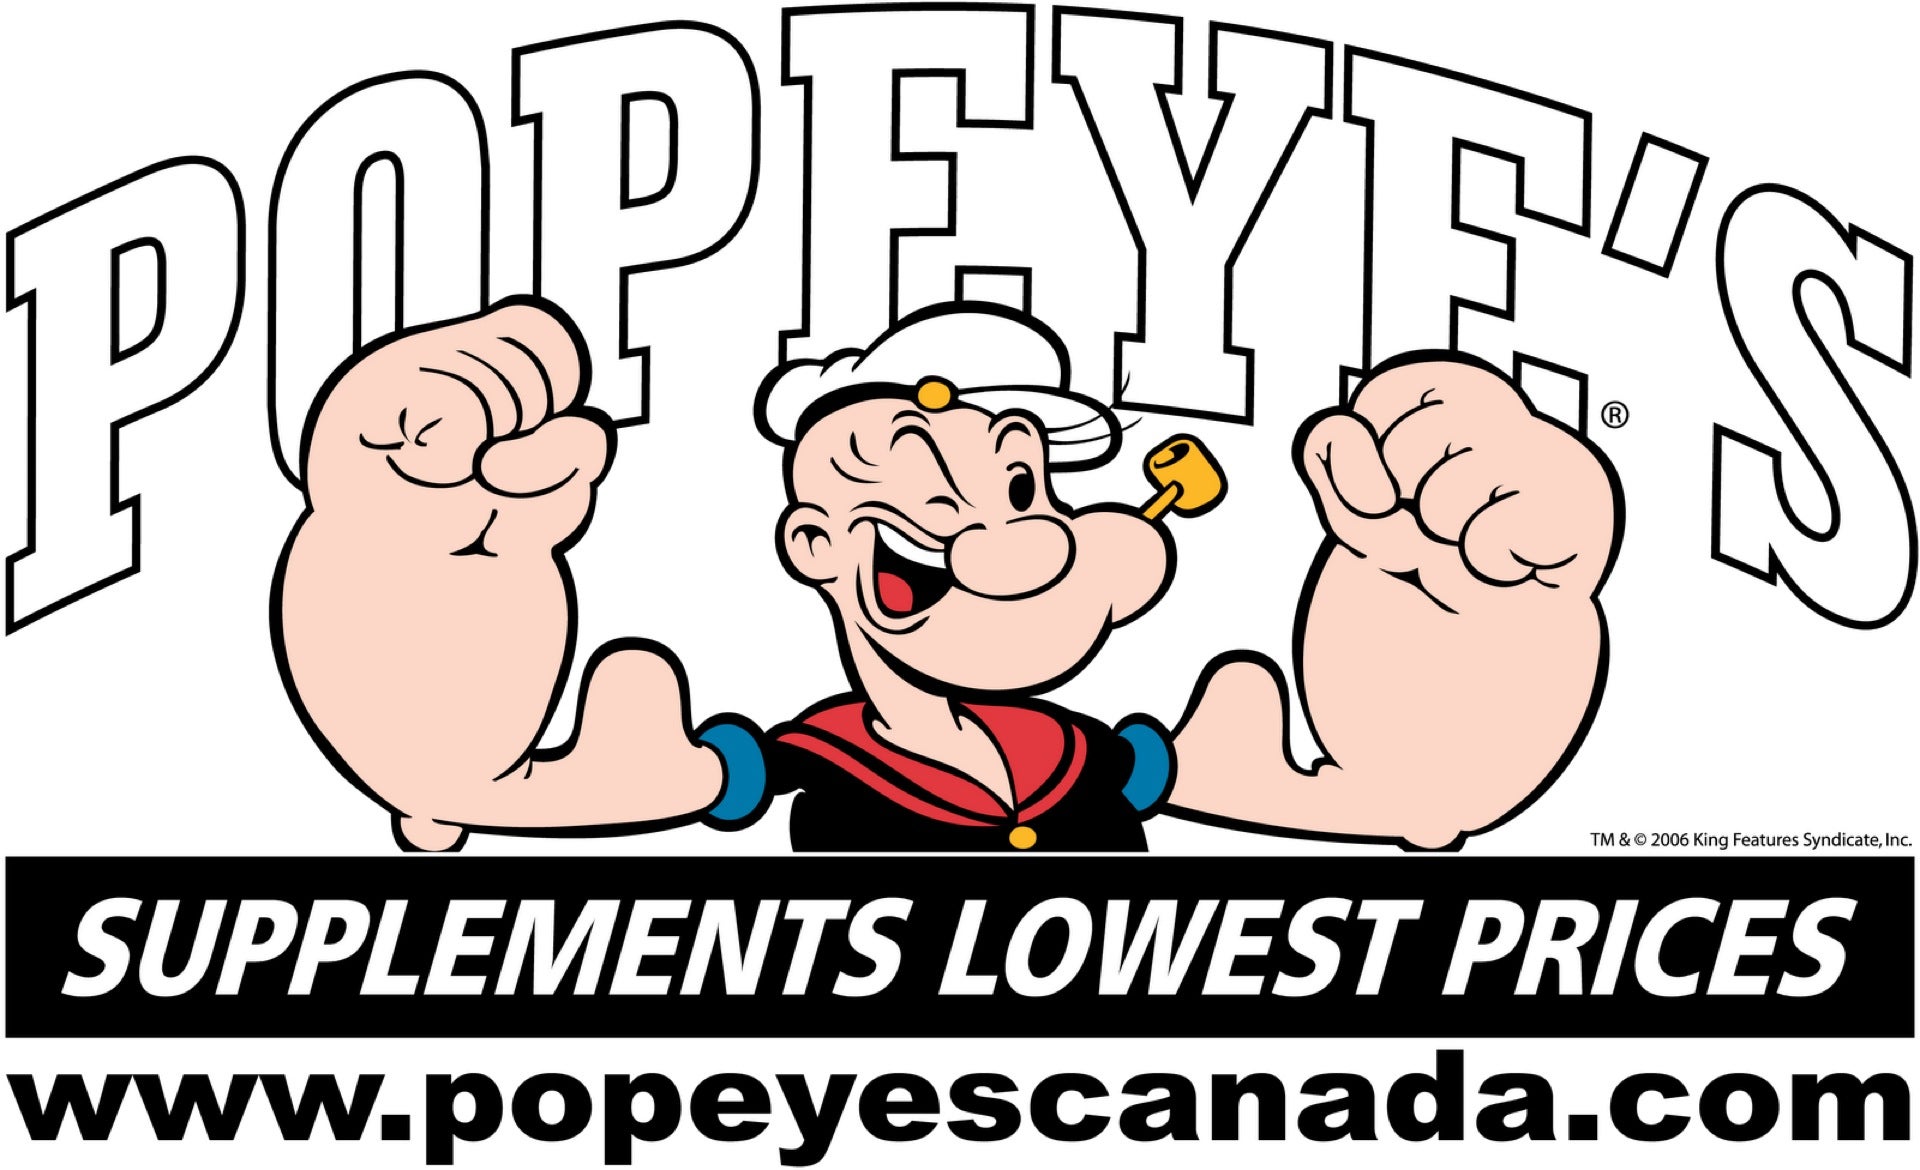 Popeye's Supplements ON